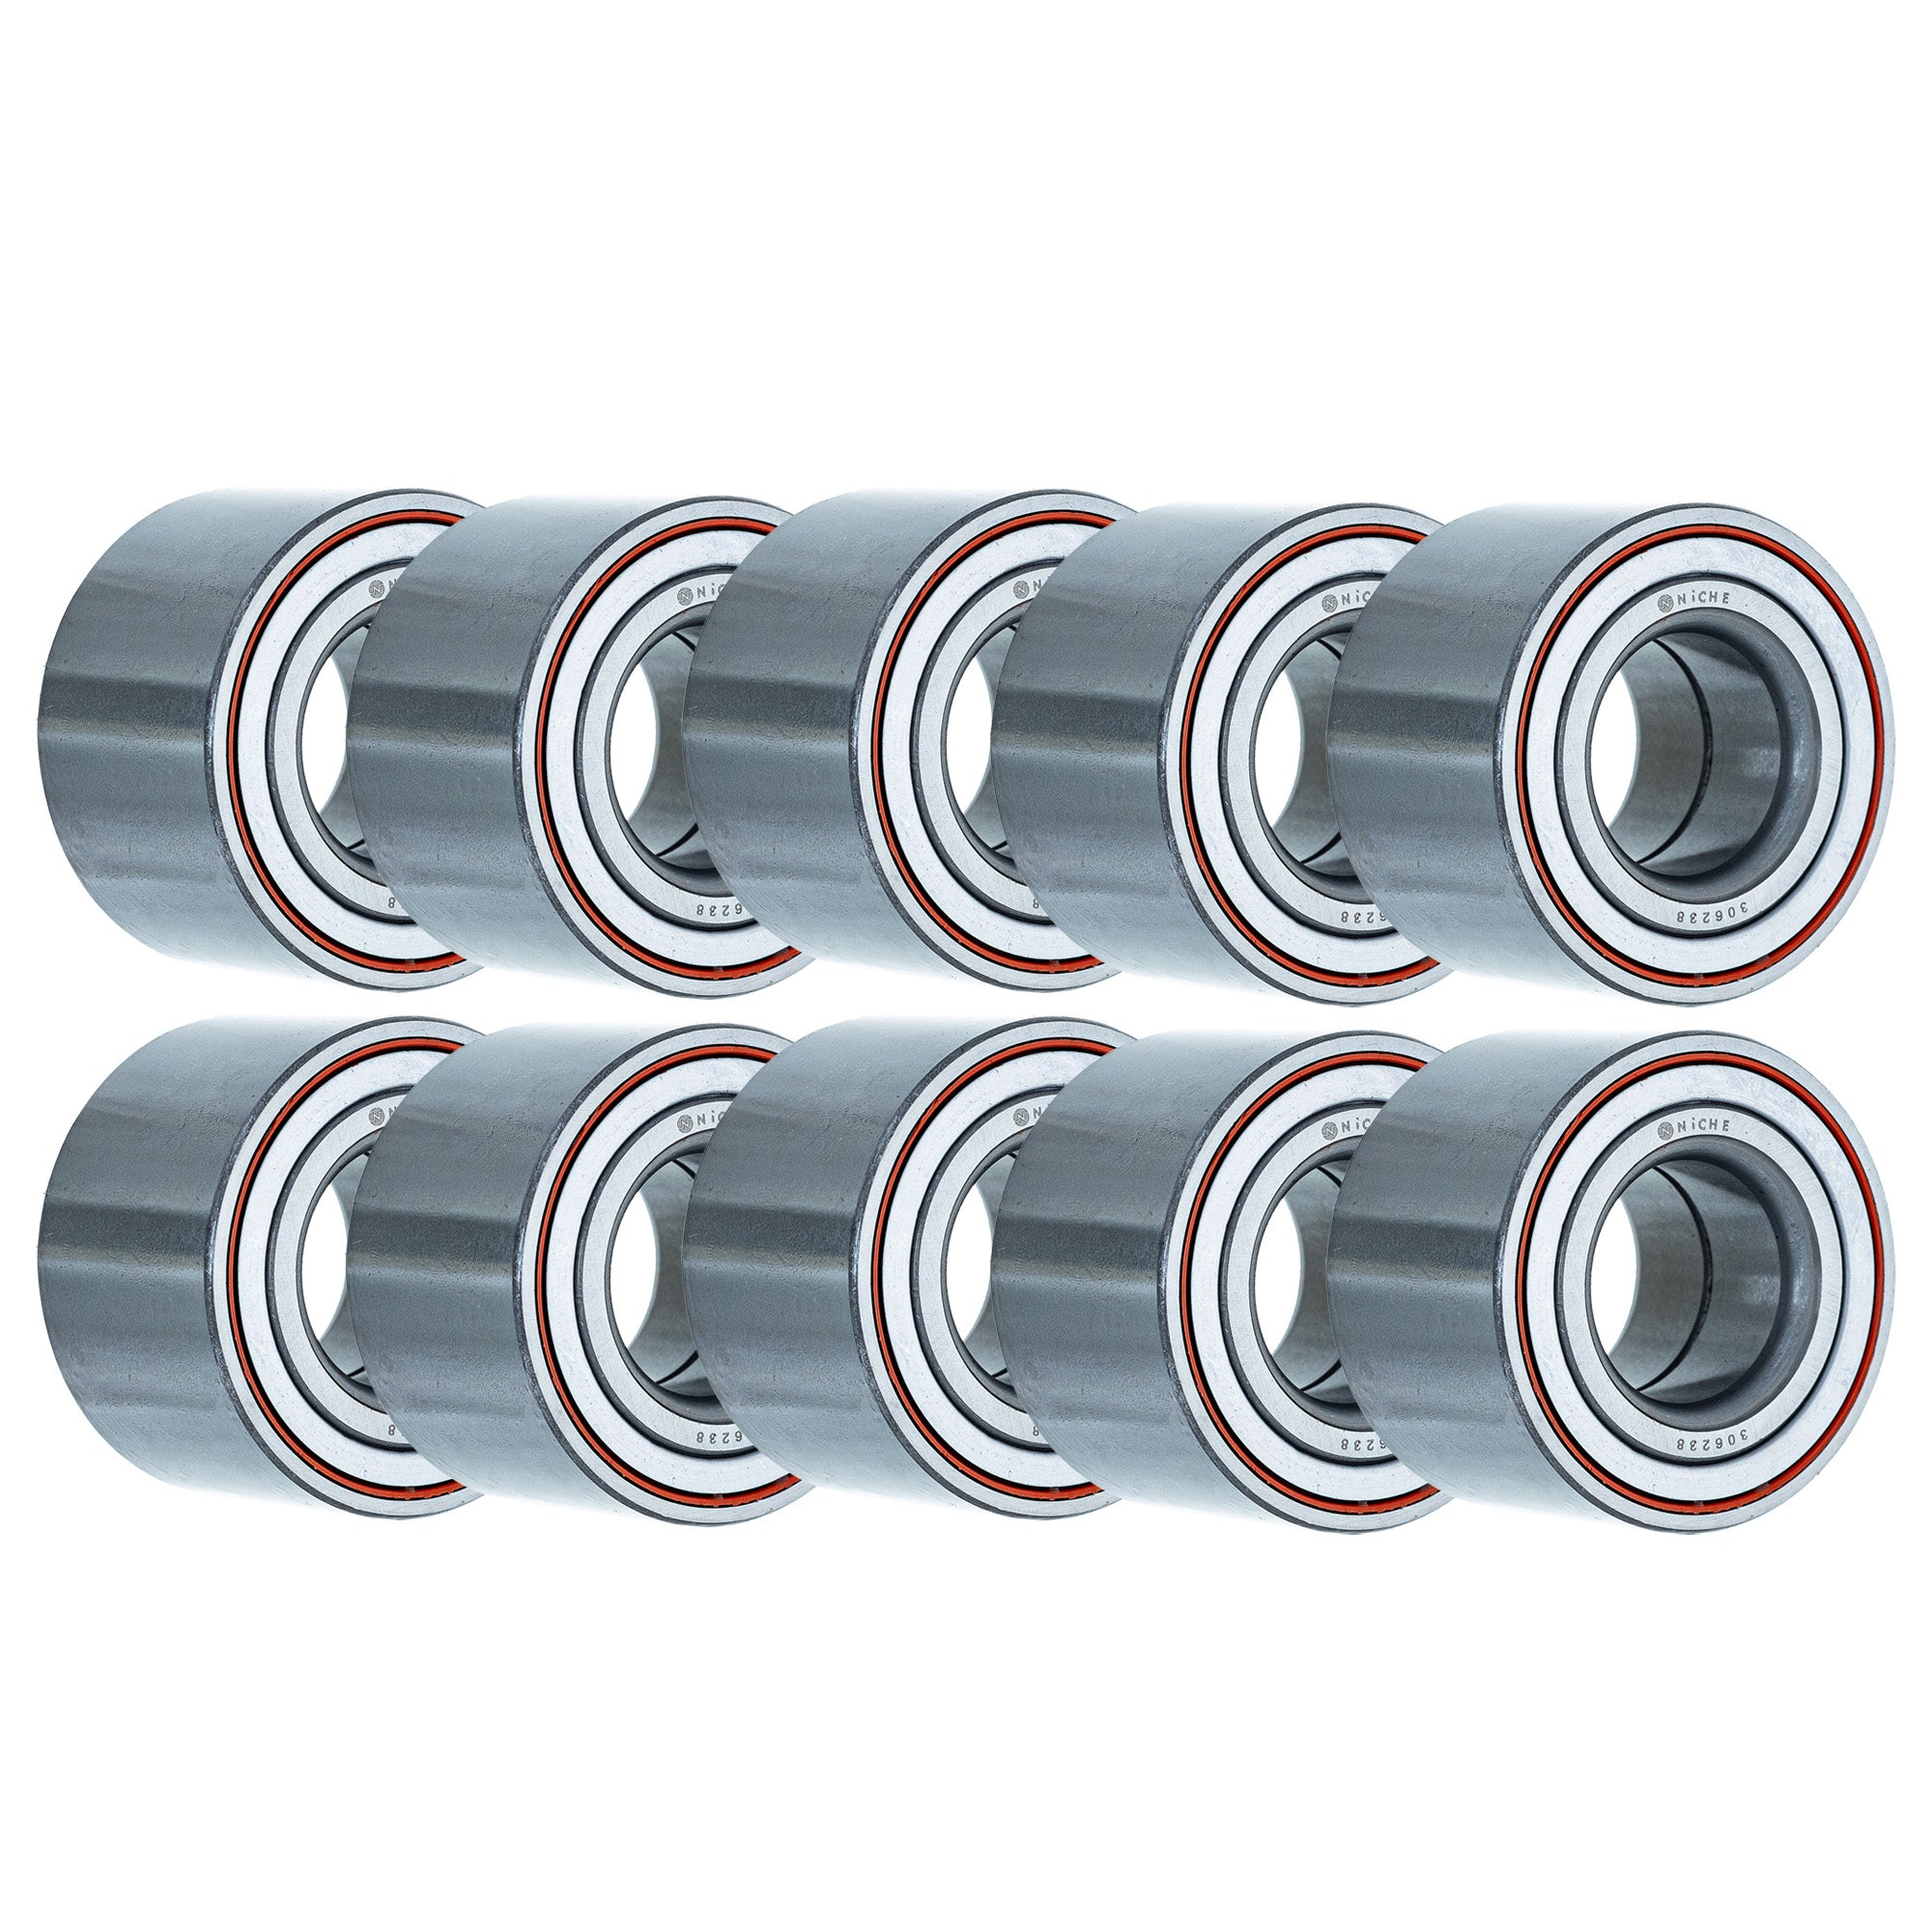 Double Row, Angular Contact, Ball Bearing Pack of 10 10-Pack for zOTHER Outlander NICHE 519-CBB2203R